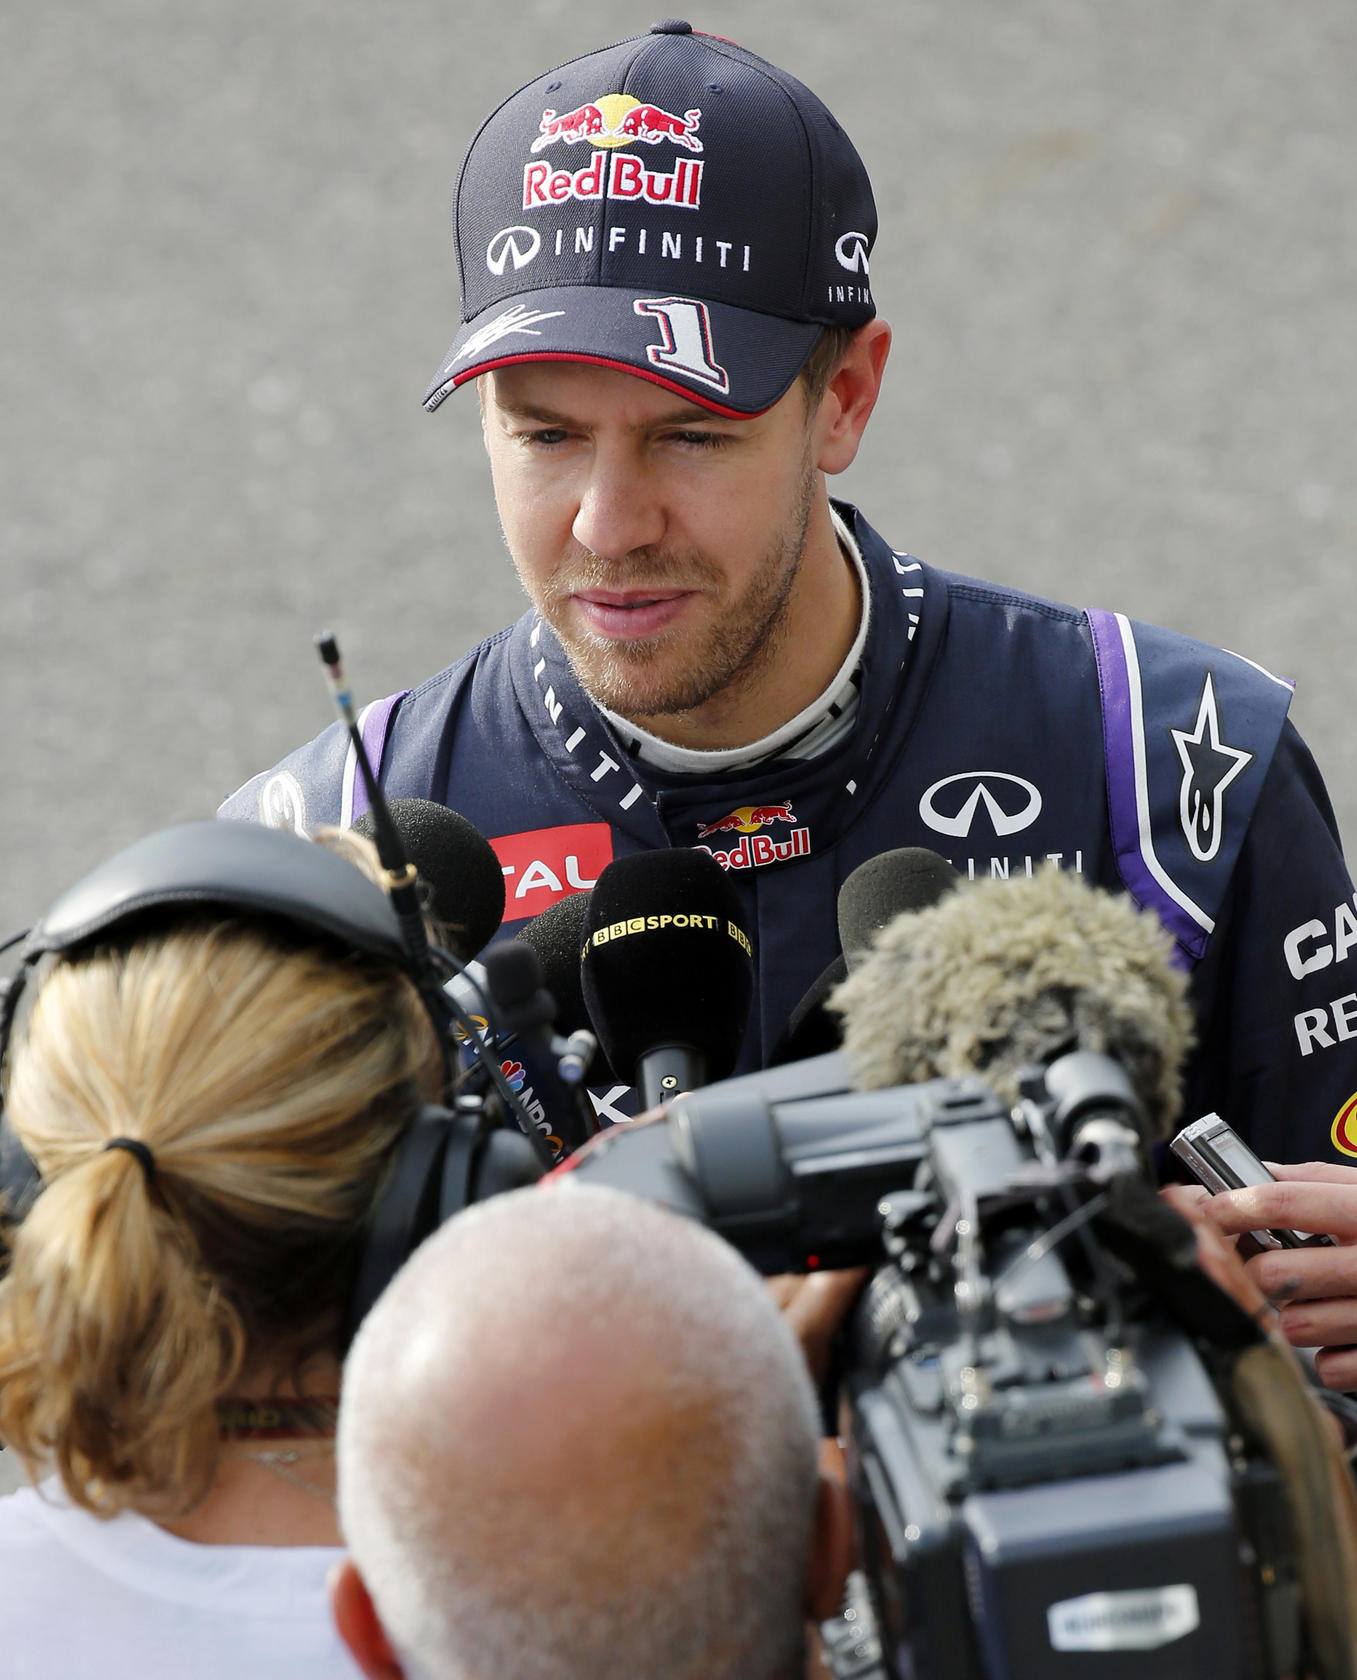 Germany's Sebastian Vettel speaks after qualifying at the Japanese Grand Prix where he revealed he is set to leave Red Bull. Photo: AP